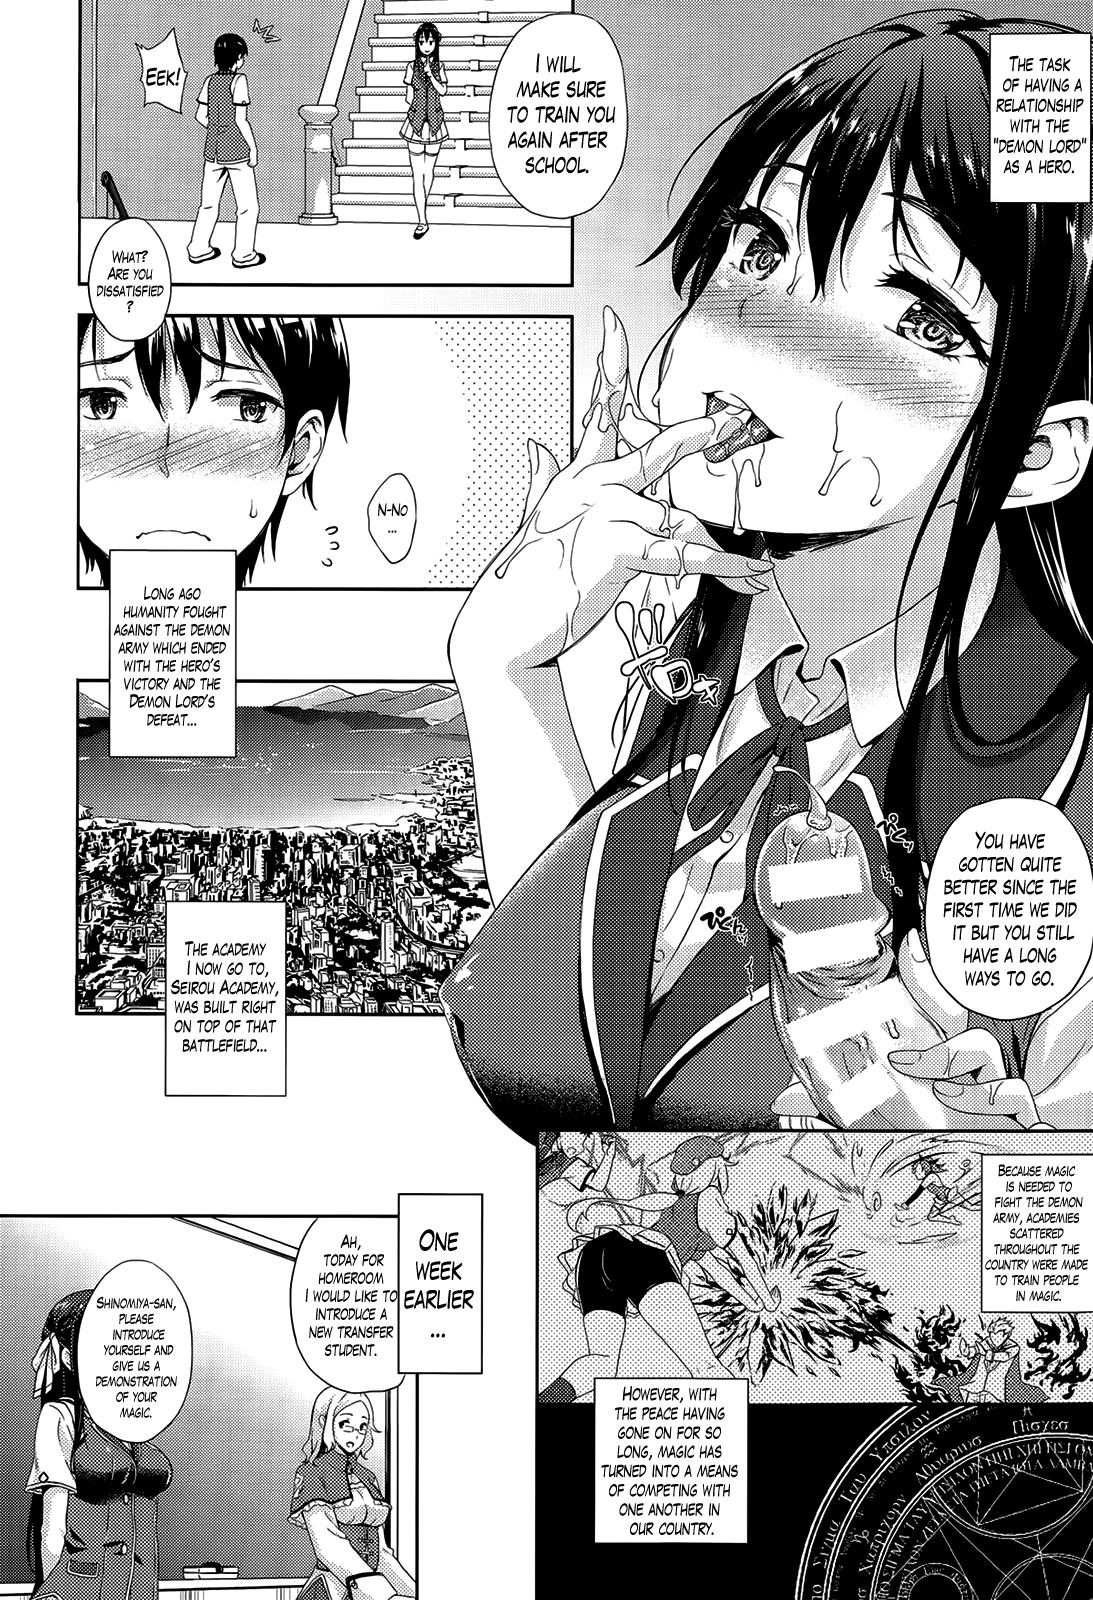 Screaming Oyomesan wa Maou!? | My Bride is the Demon Lord!? Ch. 1-6 Oral Sex - Page 2